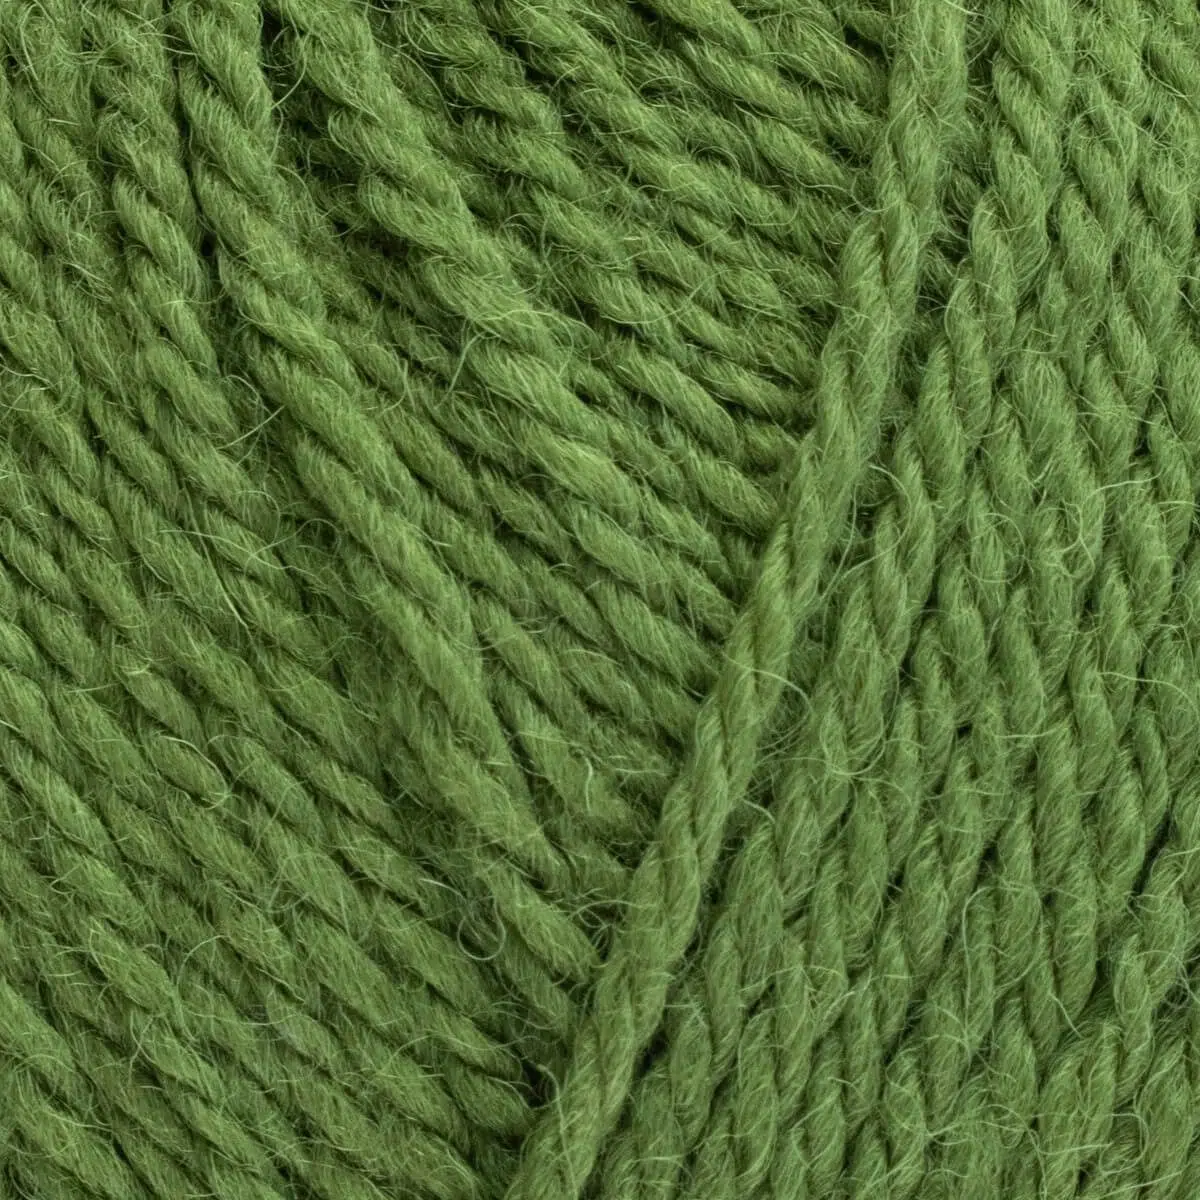 West Yorkshire Spinners - ColourLab Aran - 1177 Moss Green